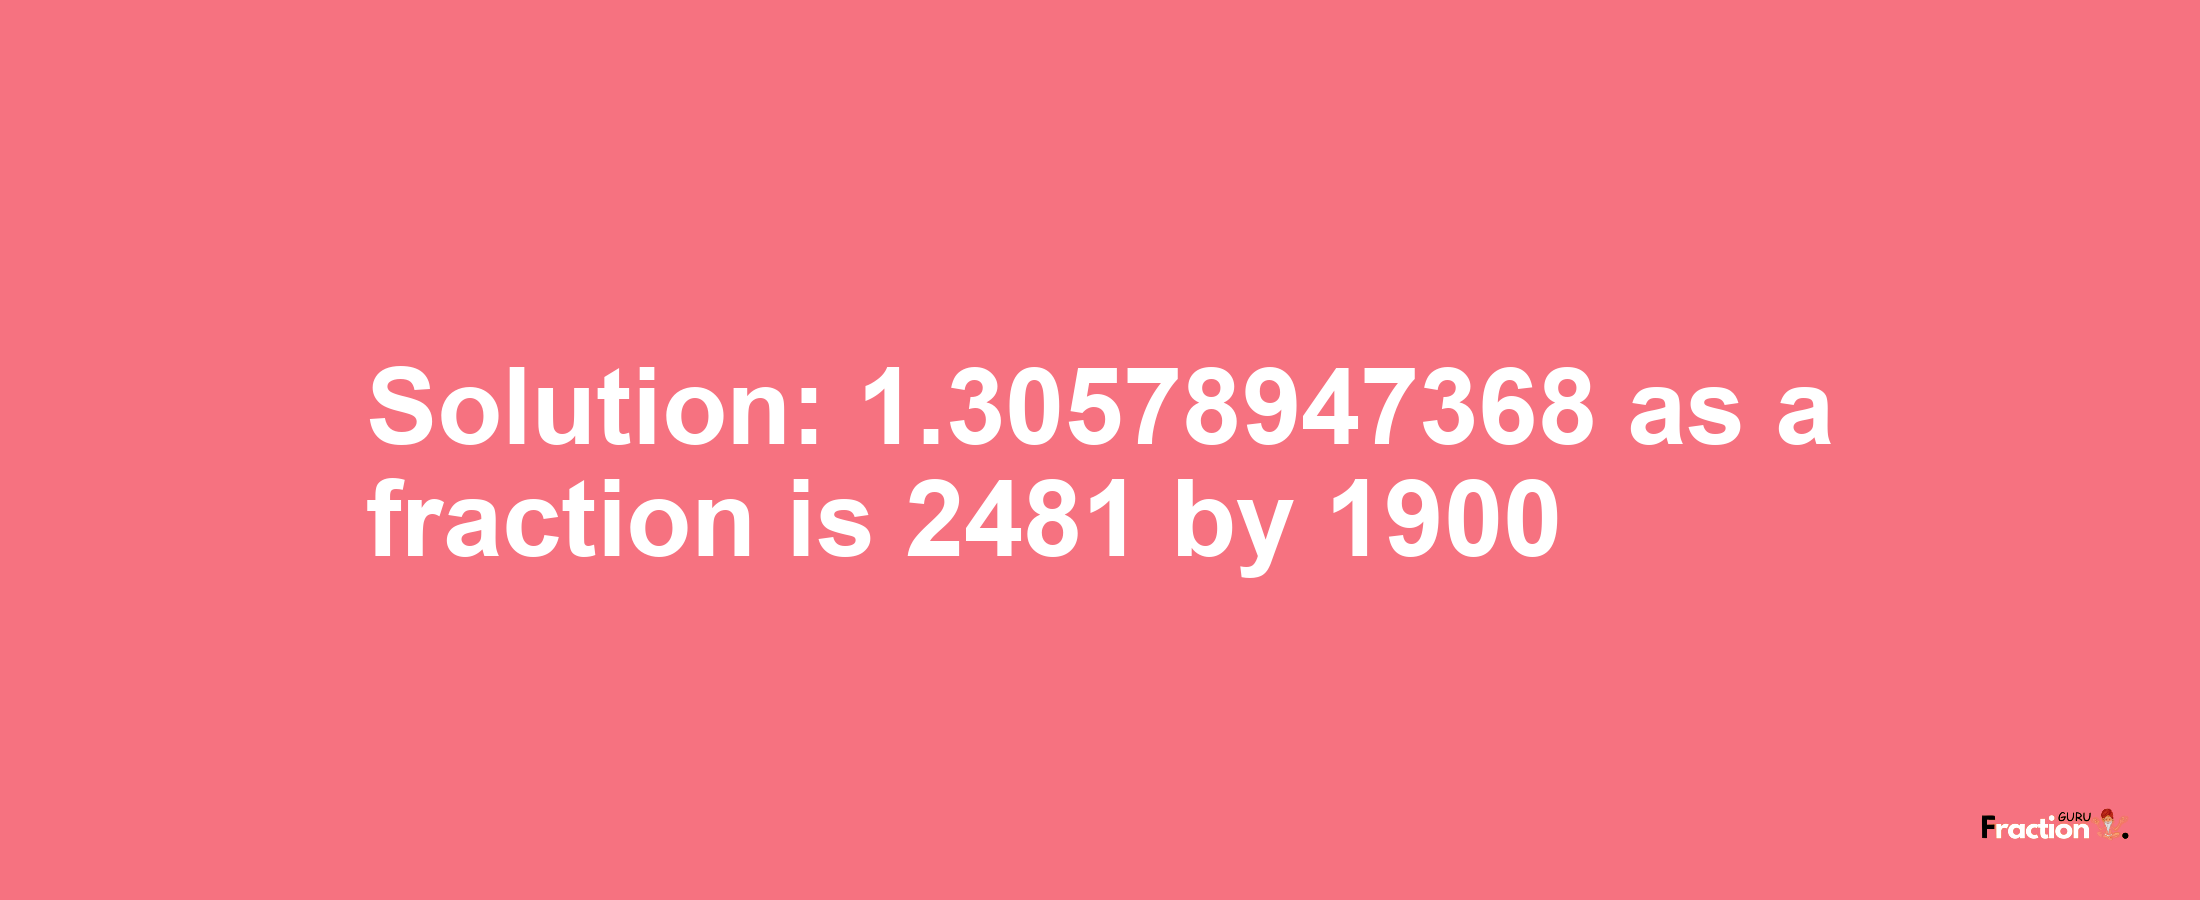 Solution:1.30578947368 as a fraction is 2481/1900